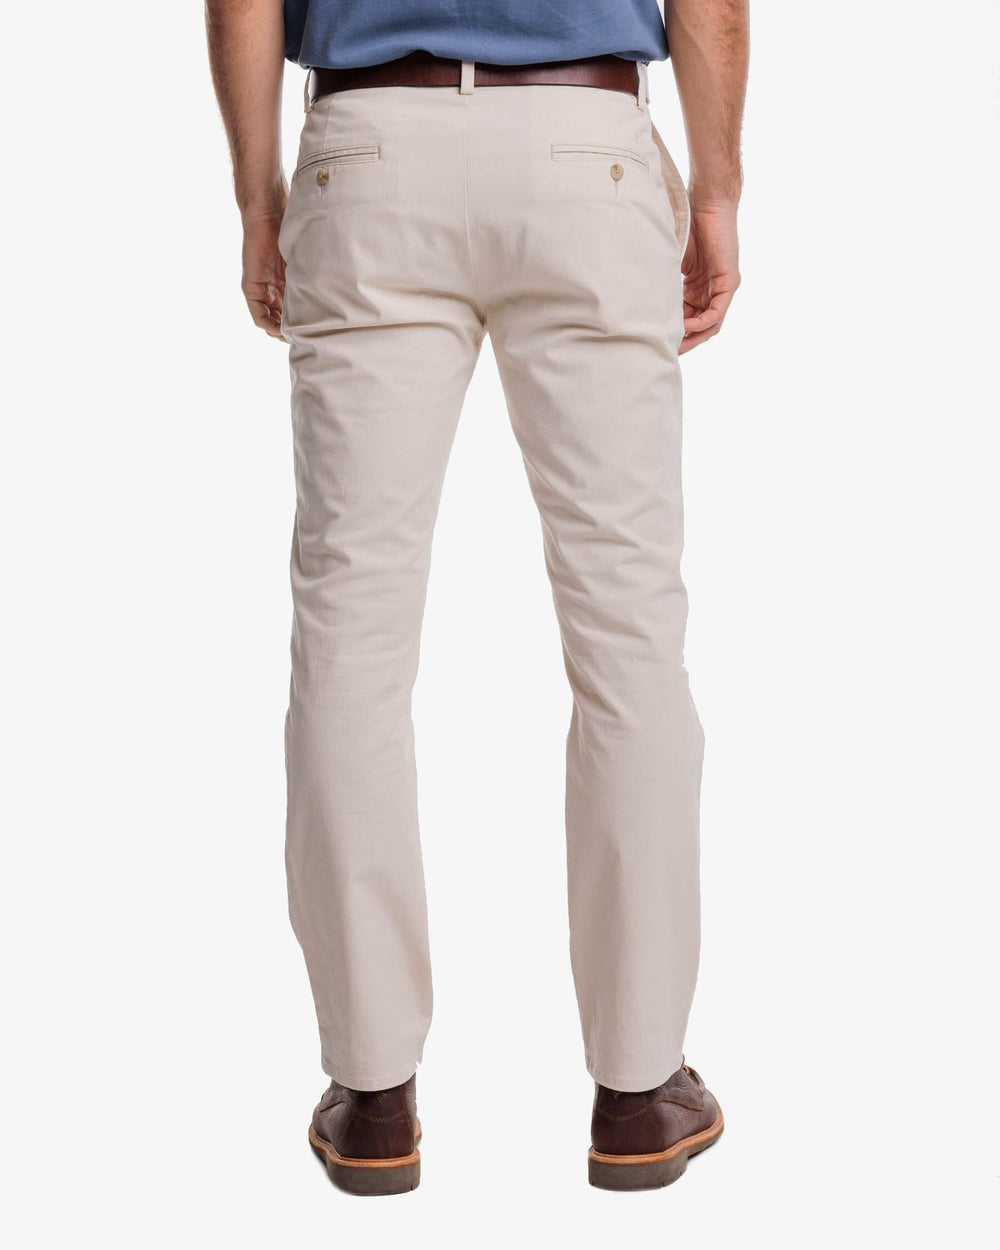 The back view of the Southern Tide Channel Marker Chino Pant by Southern Tide - Light Khaki